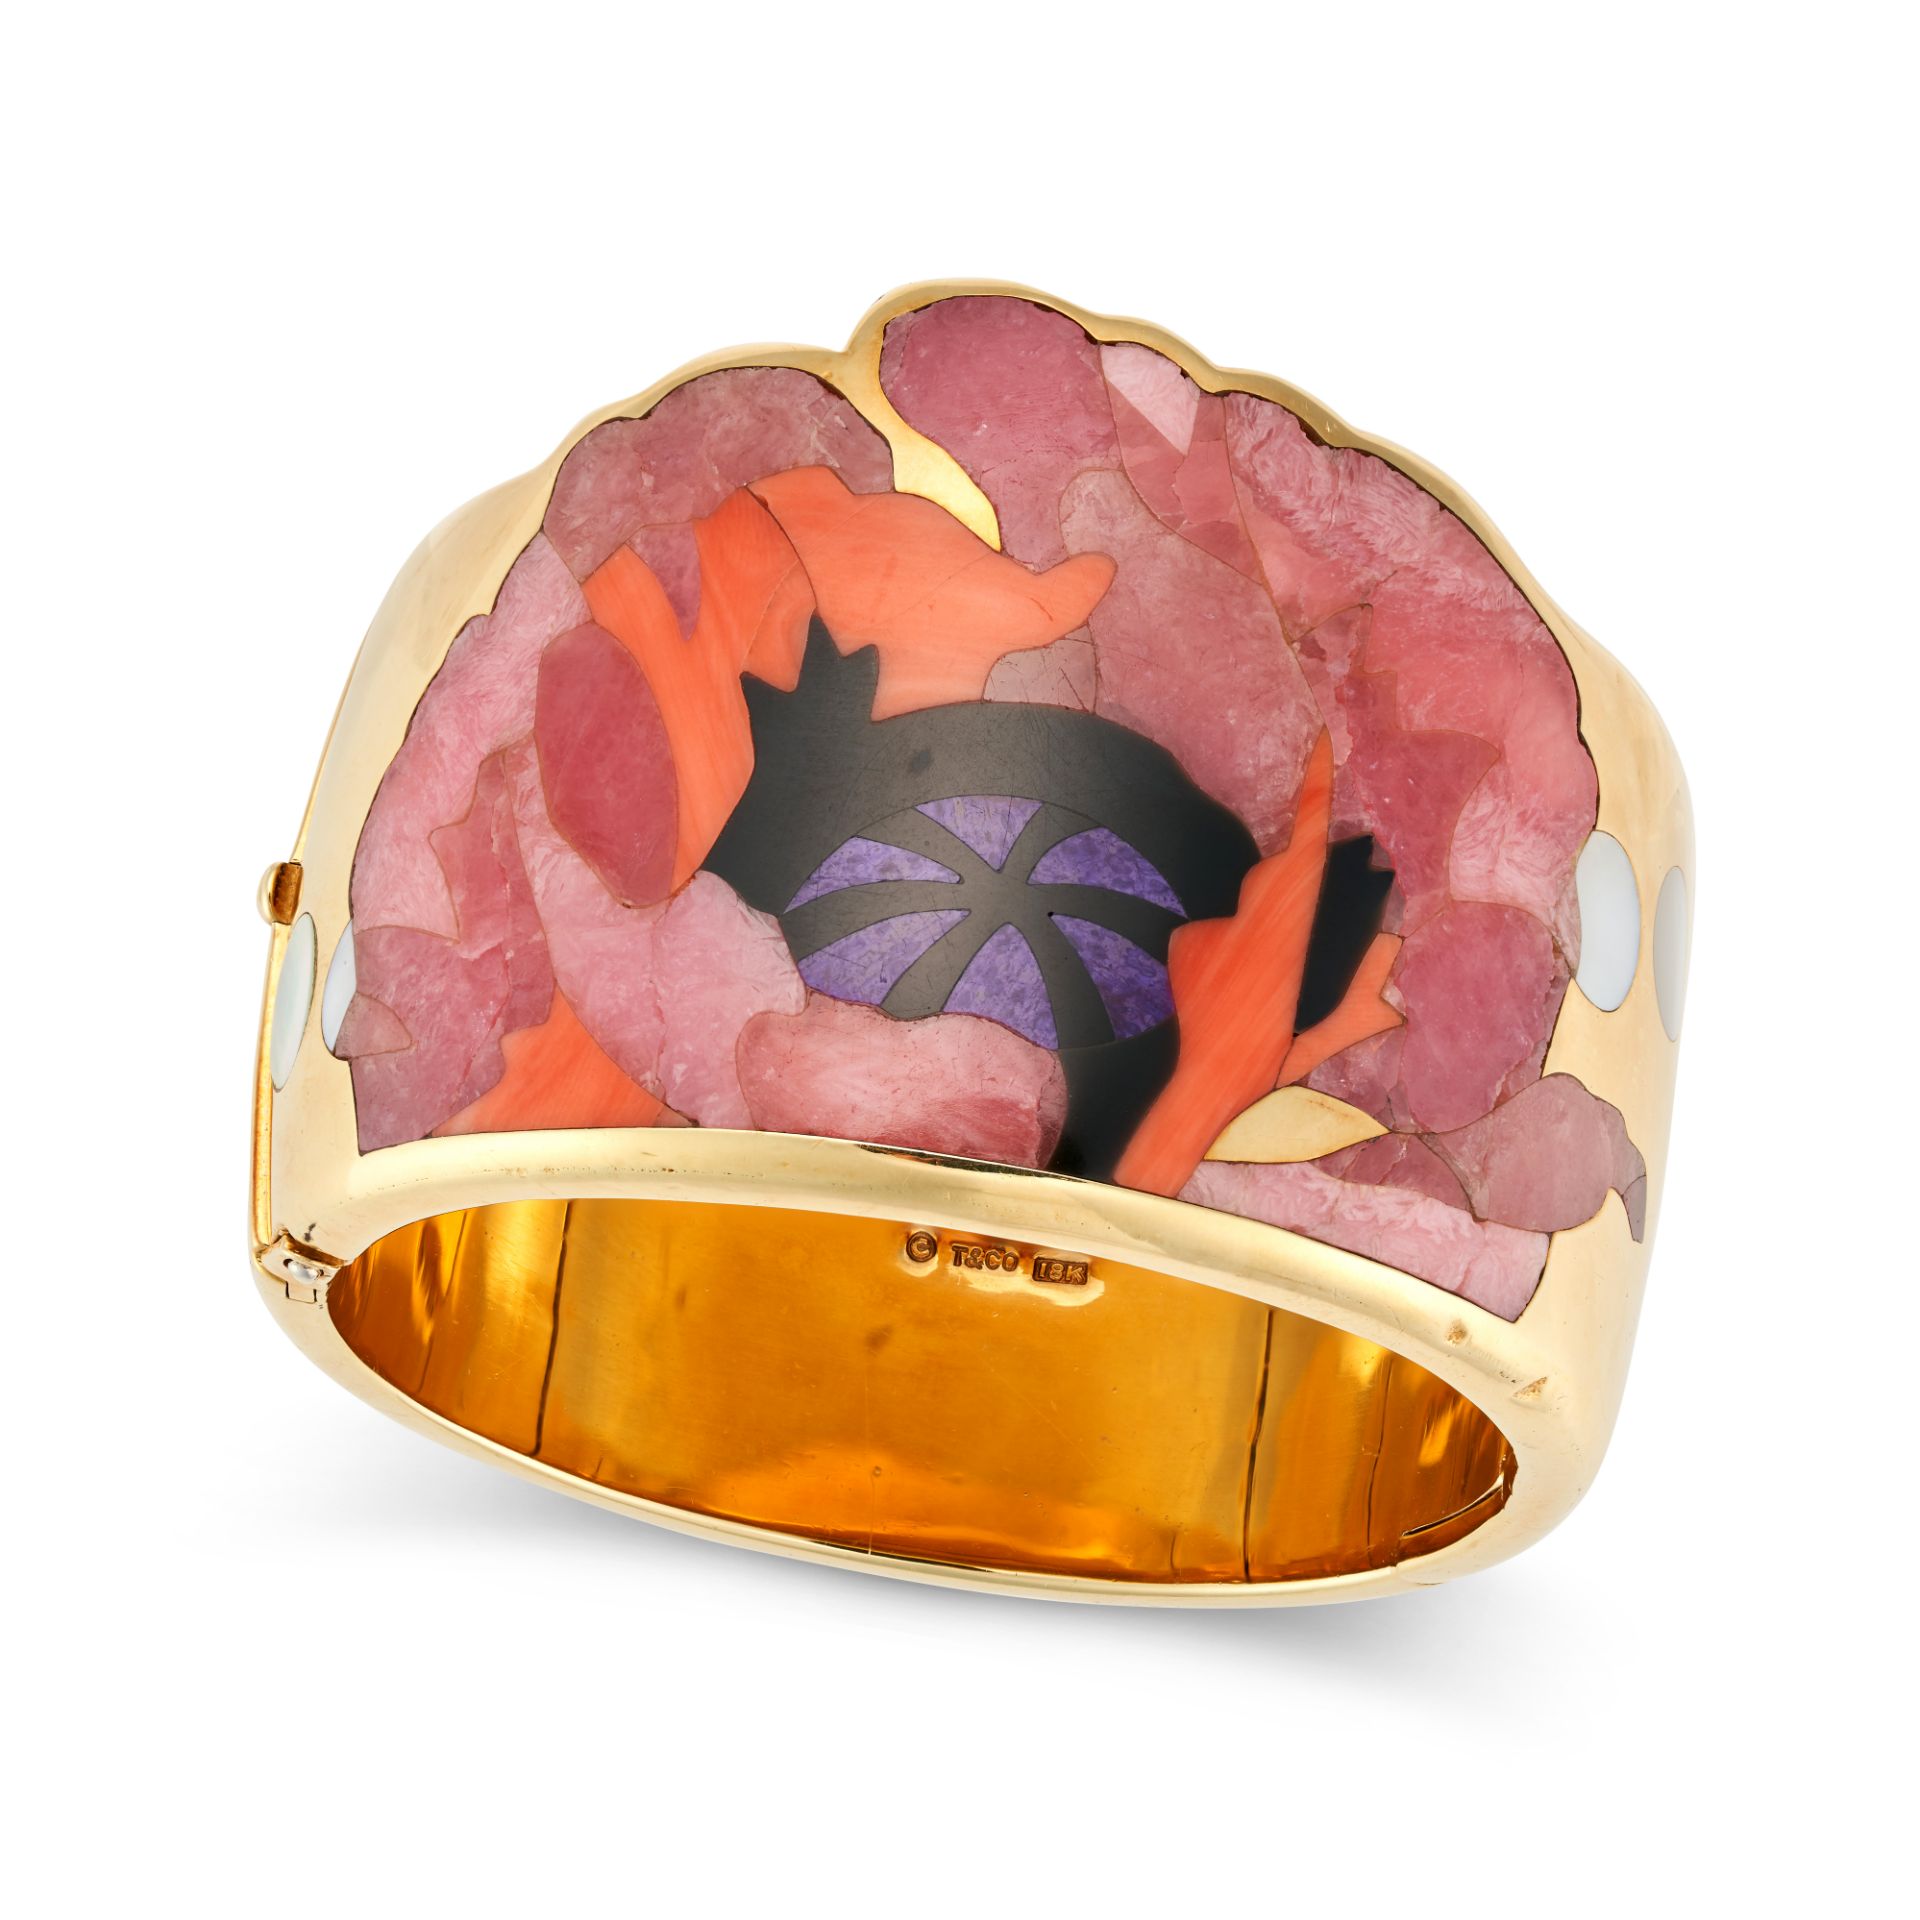 ANGELA CUMMINGS FOR TIFFANY & CO., A RHODOCHROSITE, CORAL, MOTHER OF PEARL AND JADE POPPY BANGLE ... - Image 2 of 3